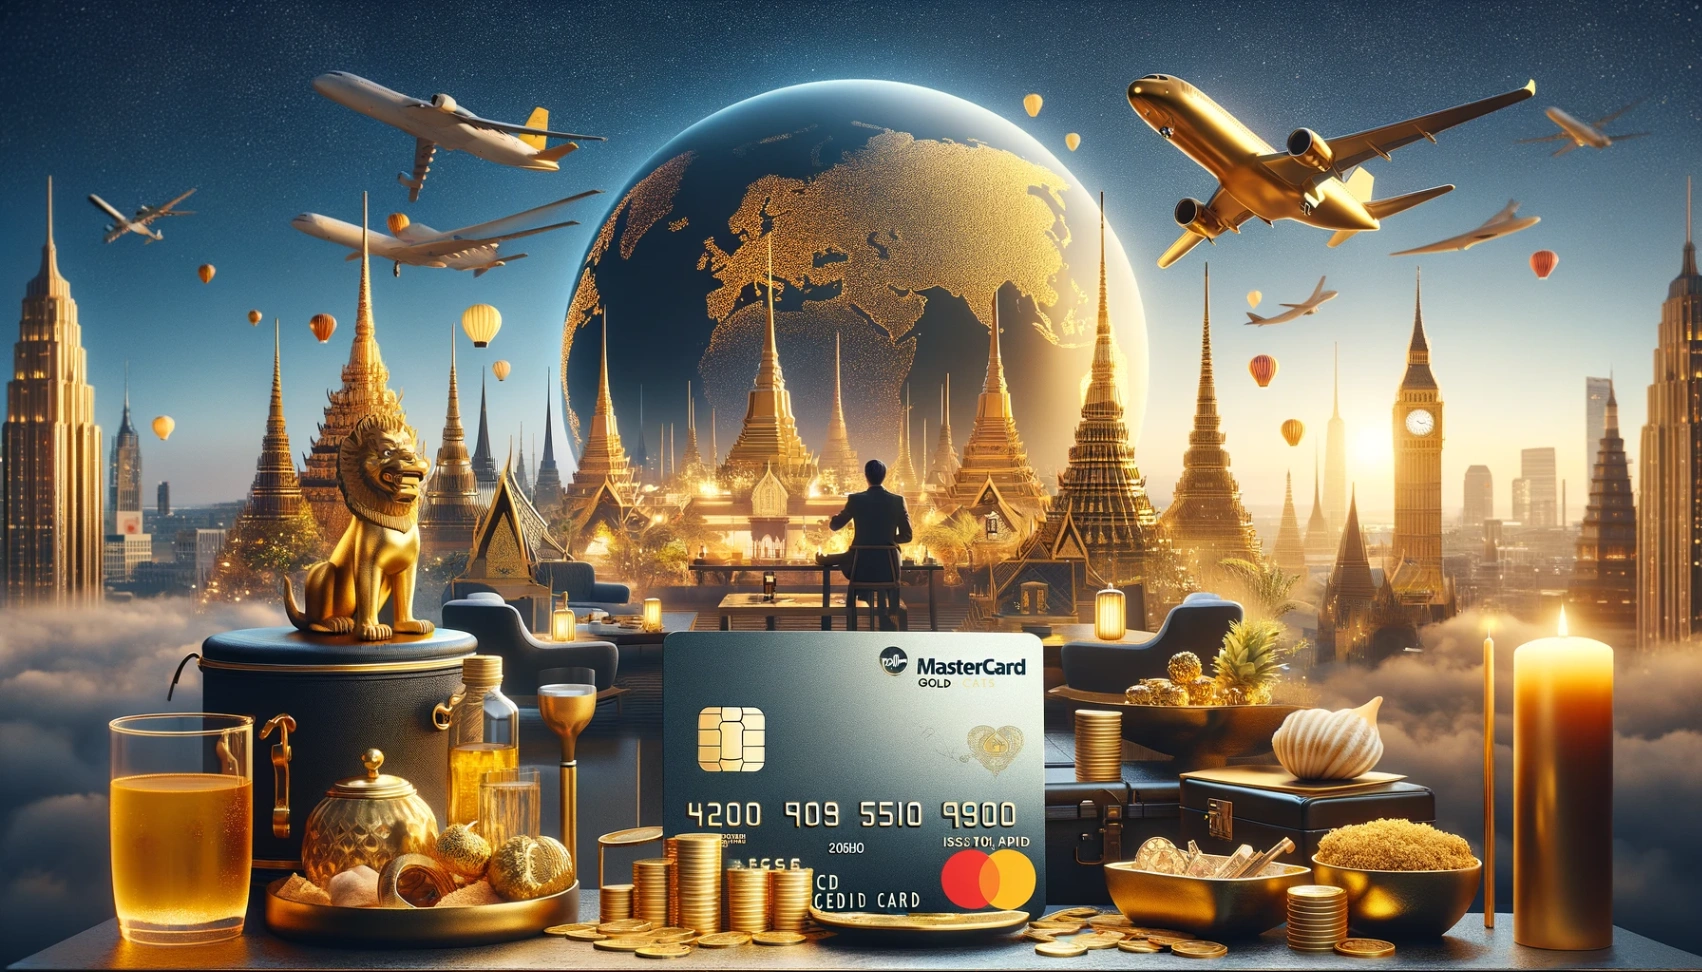 TF Bank Mastercard Gold - Discover How to Apply